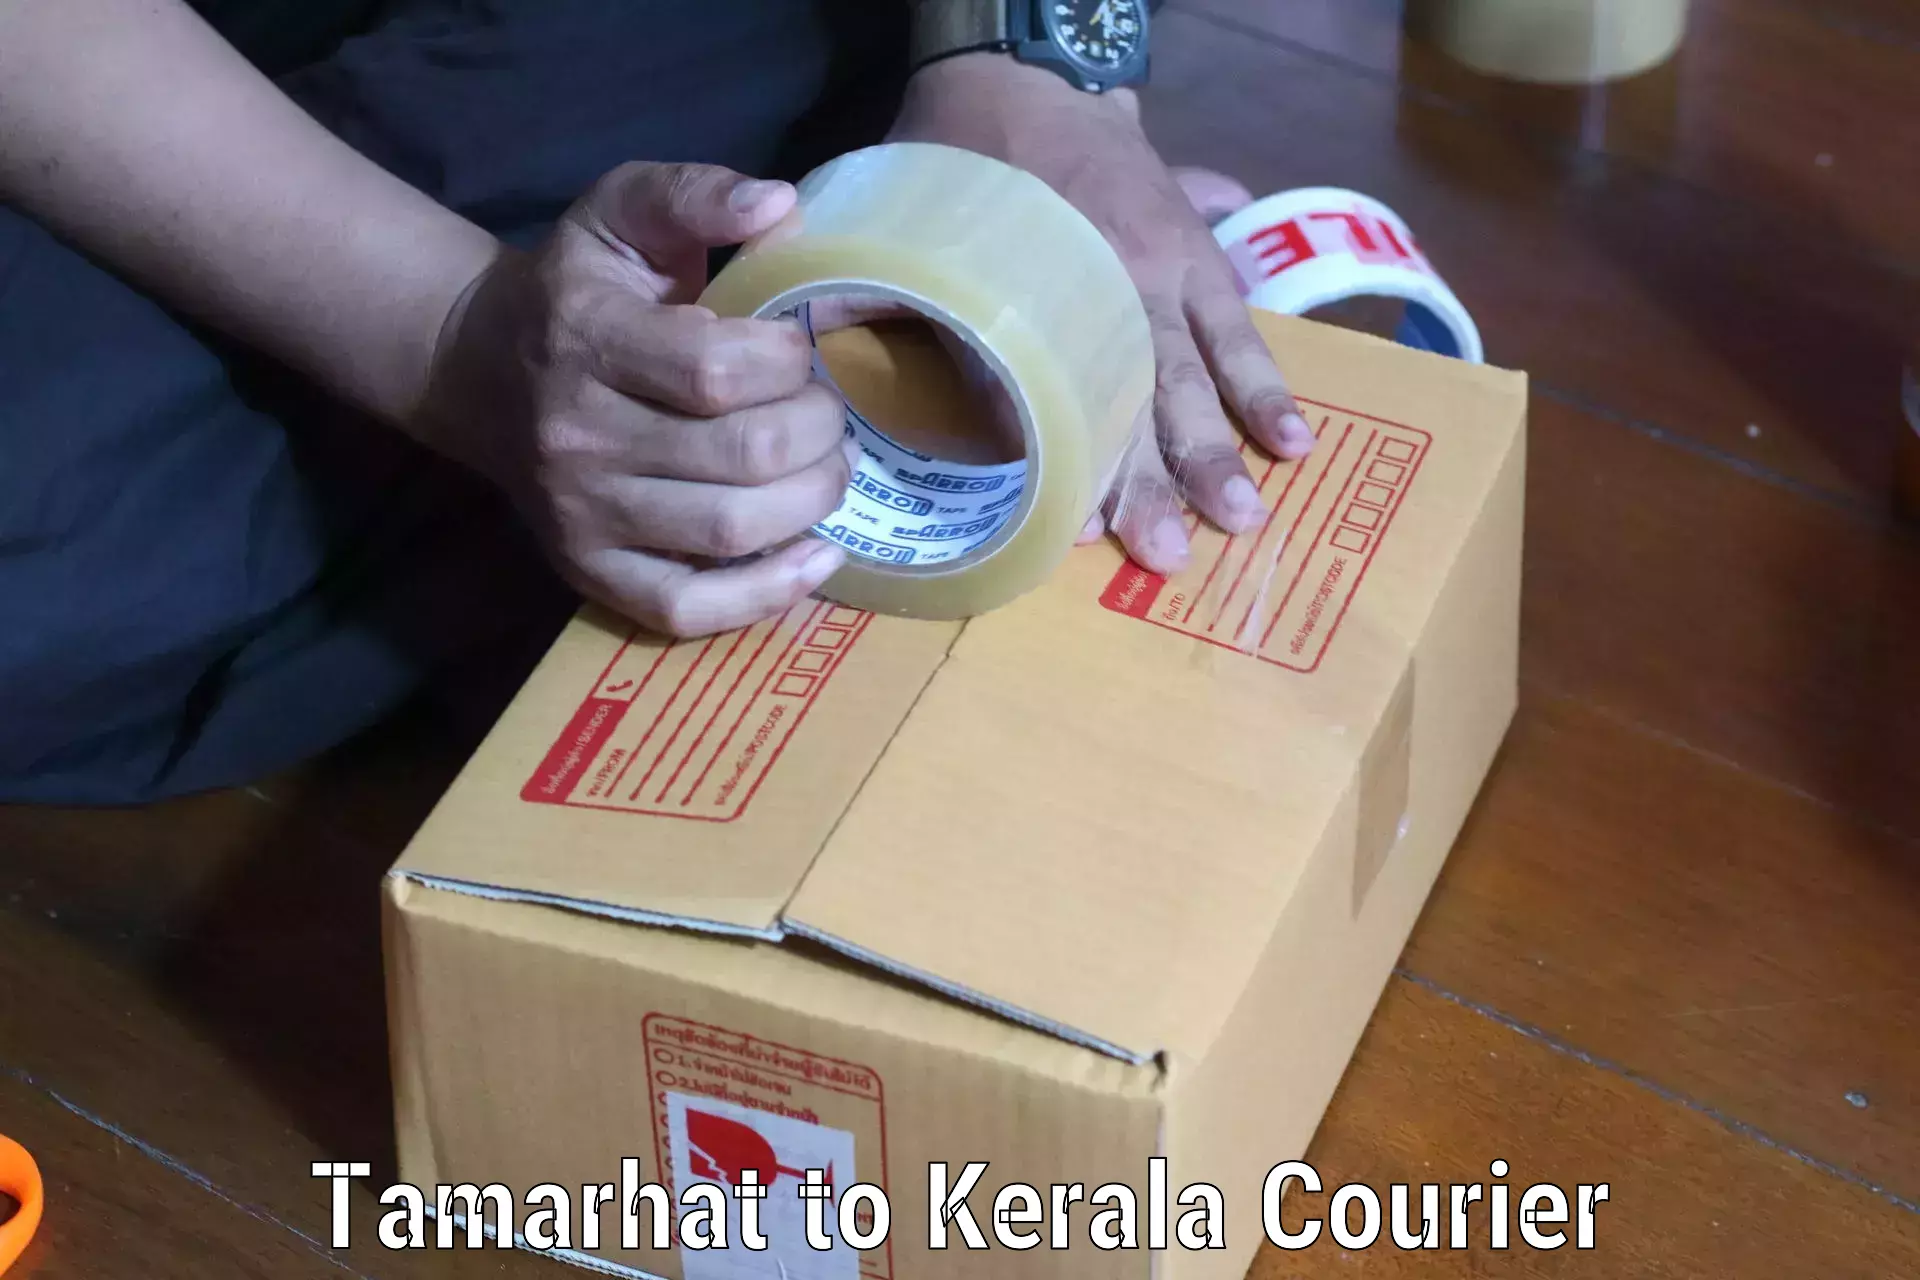 Multi-national courier services Tamarhat to Kerala